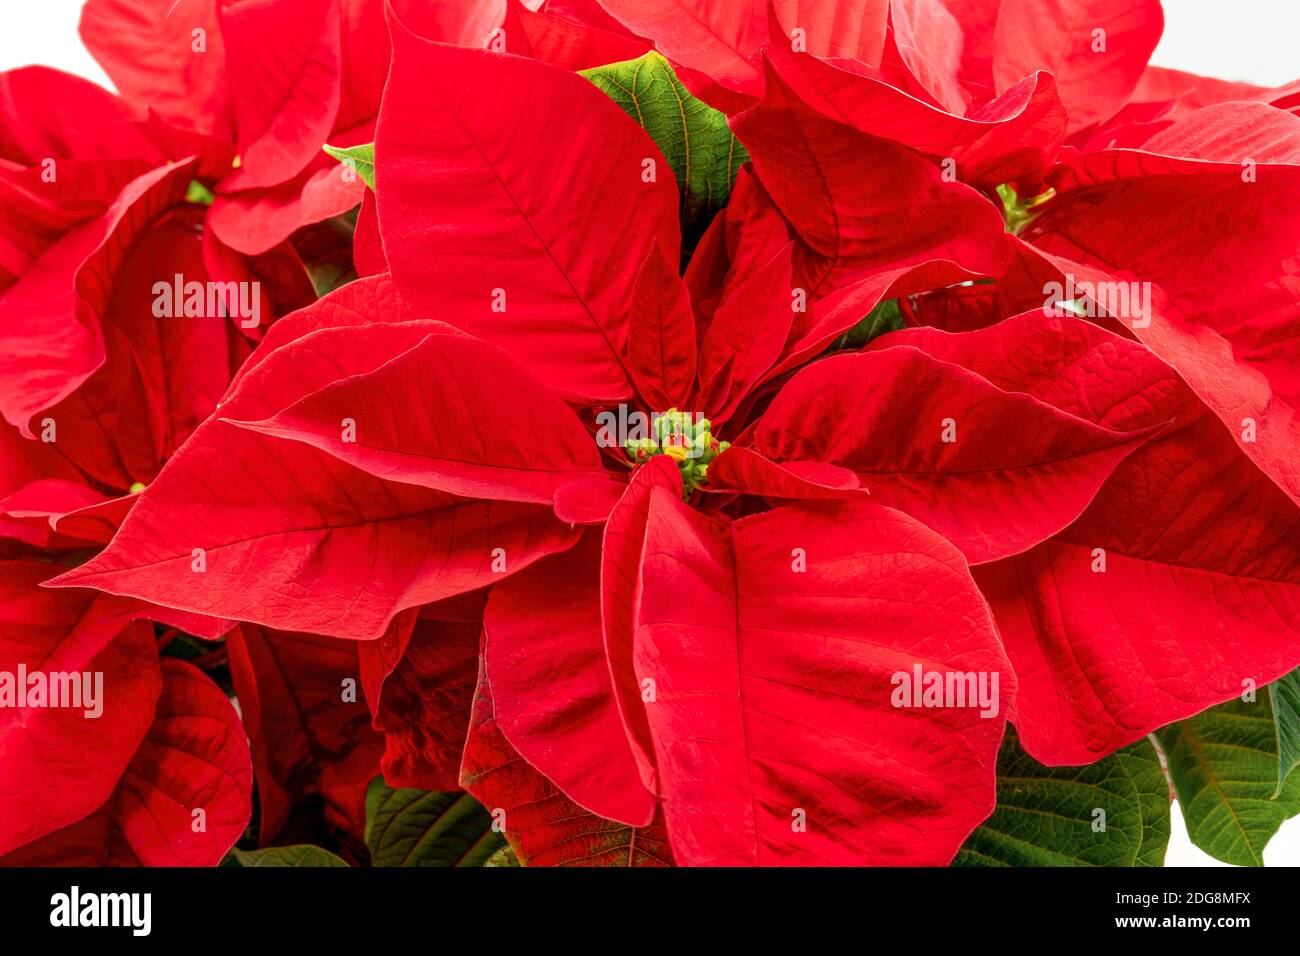 Close up view on a poinsettia plant. Ideal image for botany and holidays. Stock Photo